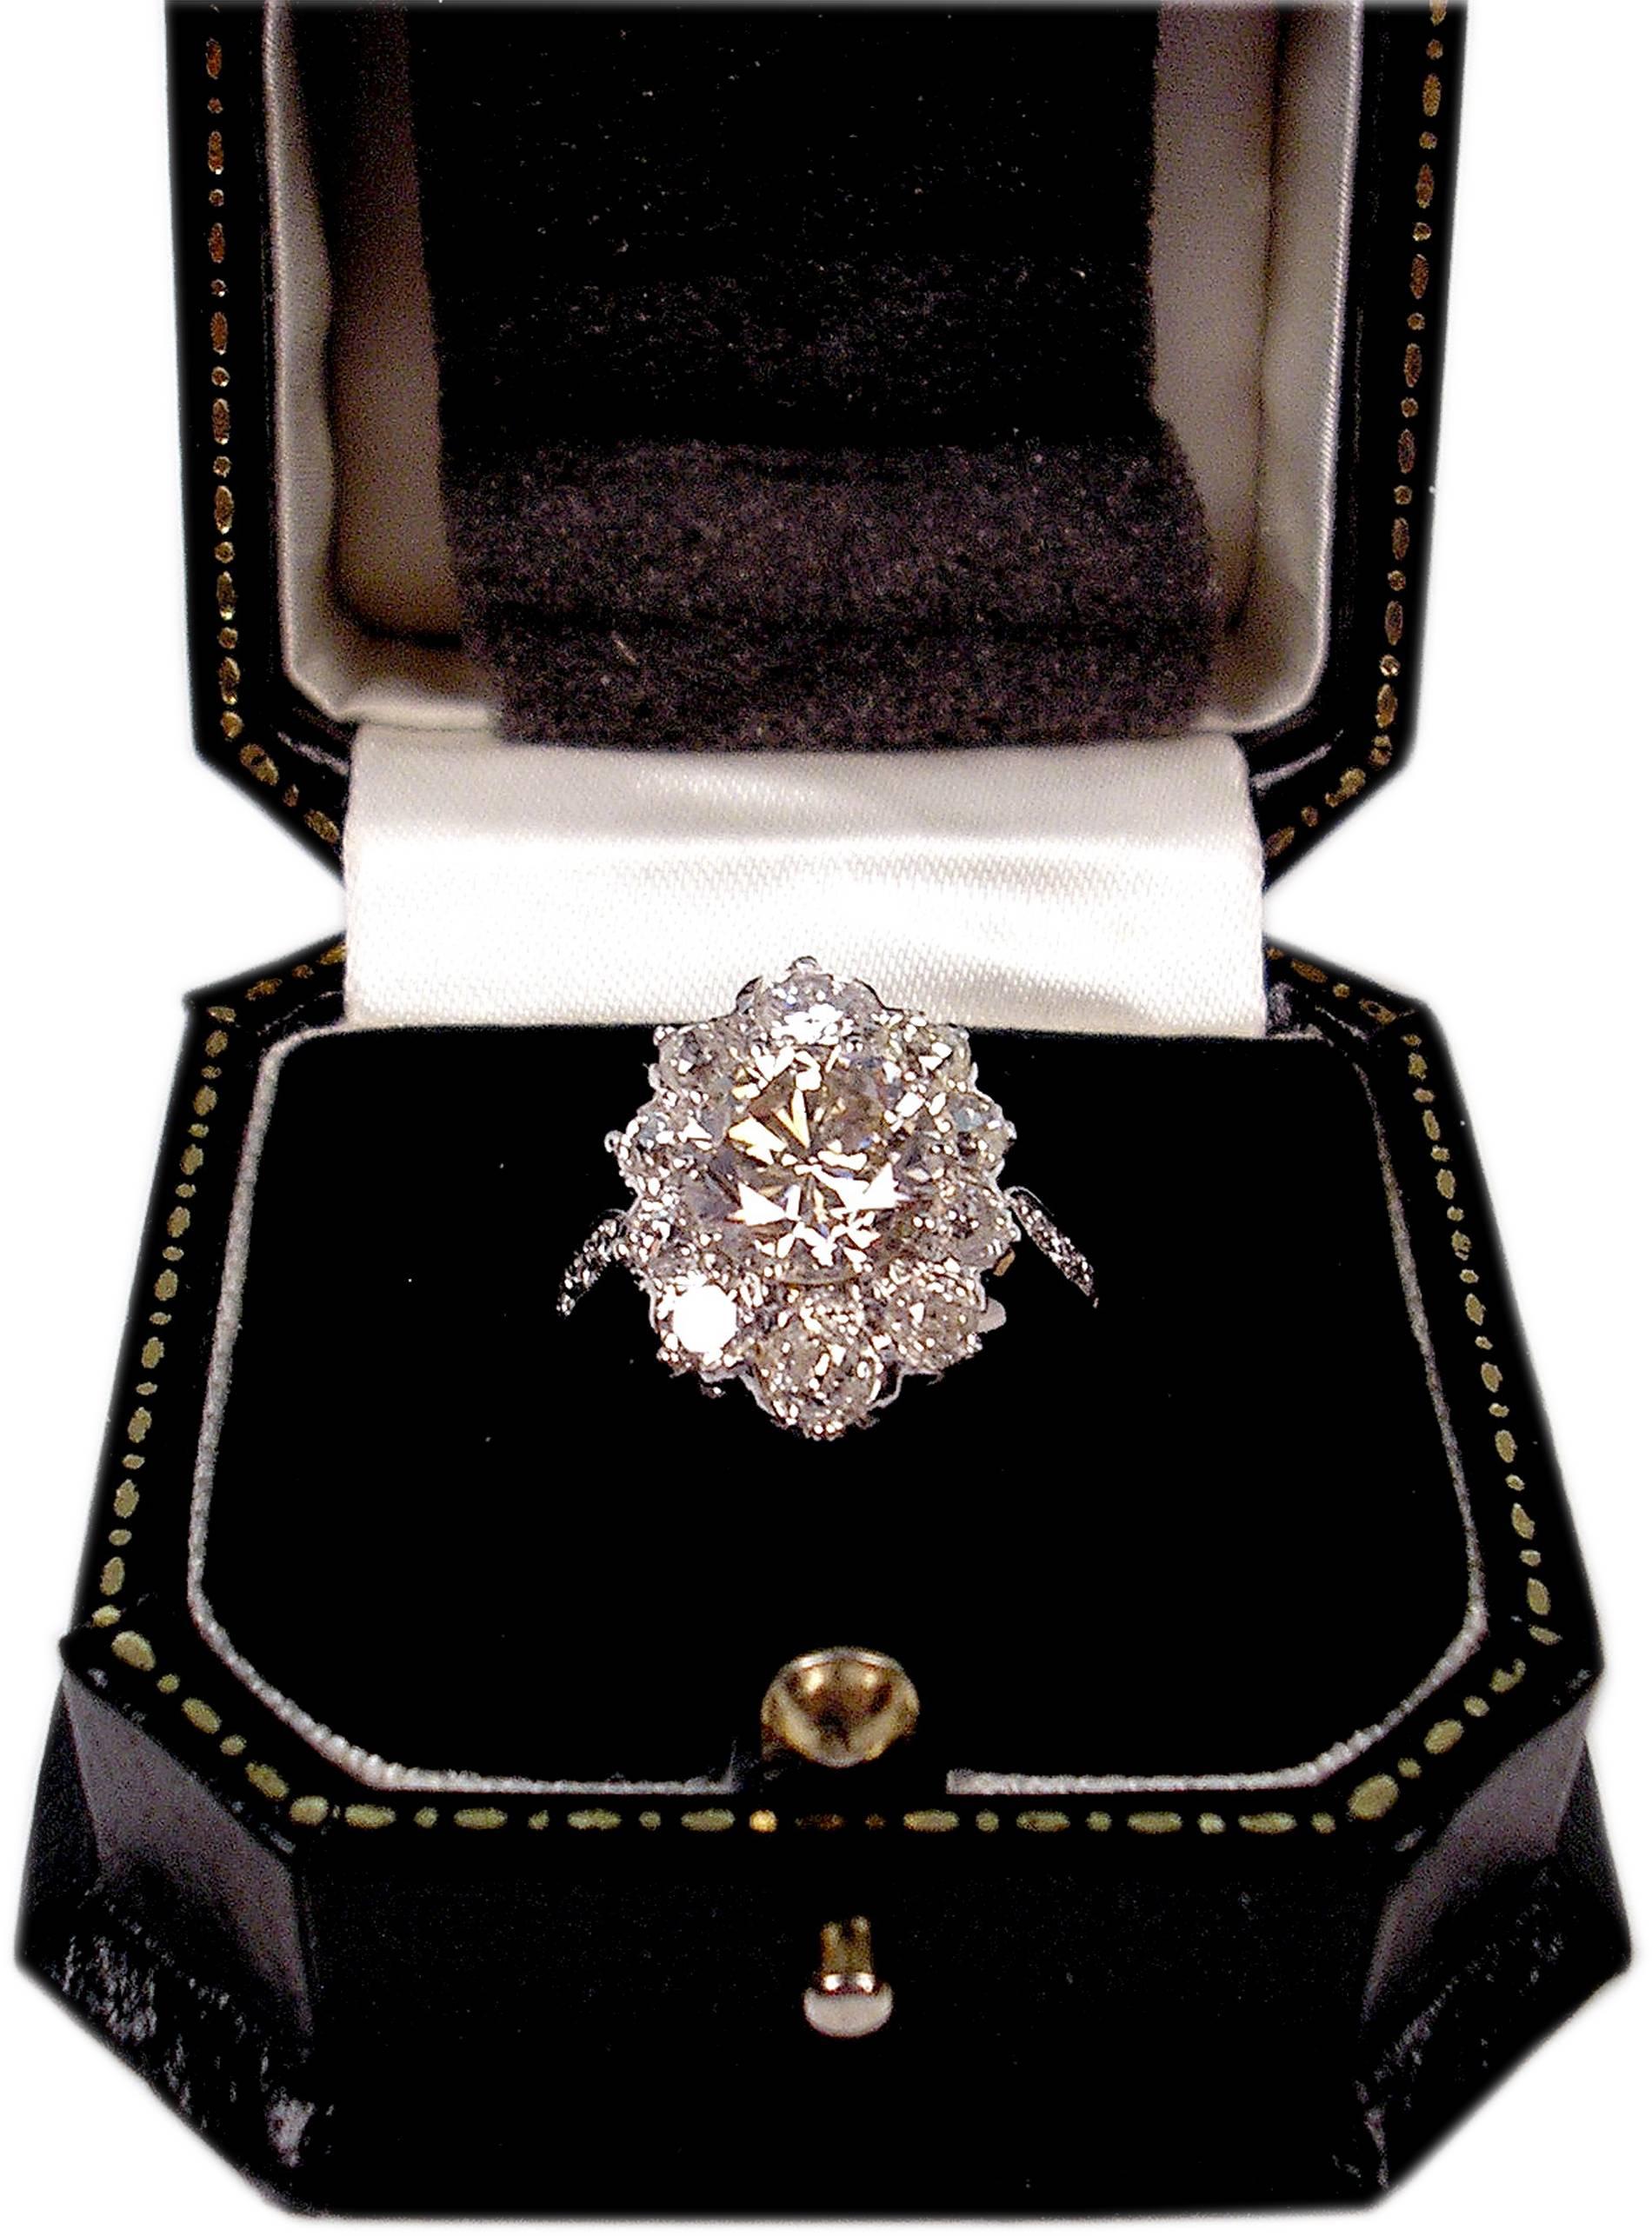 GOLDEN ART DECO GORGEOUS RING OF HIGHEST VALUE WITH SOLITAIRE &  MANY DIAMONDS  

GOLD  (14 ct / 585)  &  DIAMONDS  (VINTAGE CUTS / 2.70 Carat)   

RING OF SUPERB APPEARANCE: 
ONE LARGE SOLITAIRE (BRILLIANT) IS ATTACHED TO MIDDLE AREA  /  VARIOUS 